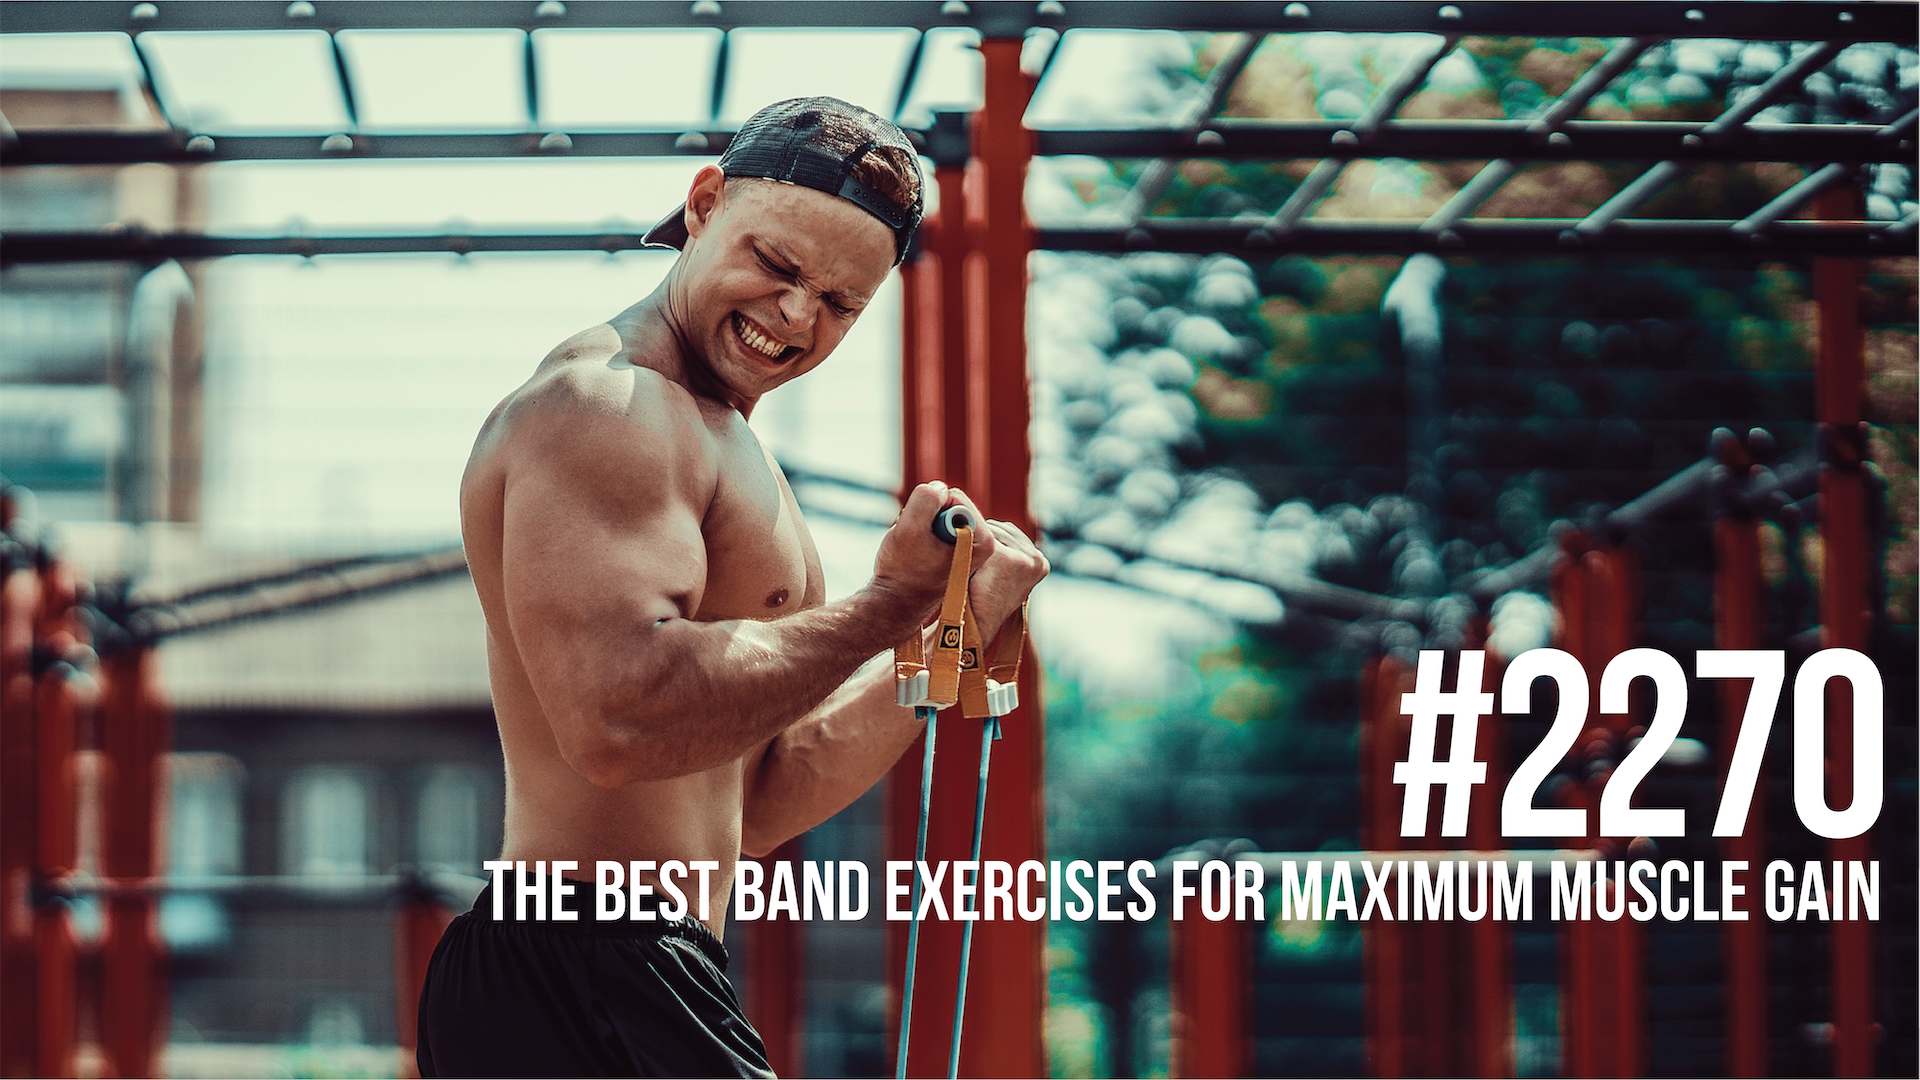 2270: The Best Band Exercises for Maximum Muscle Gain